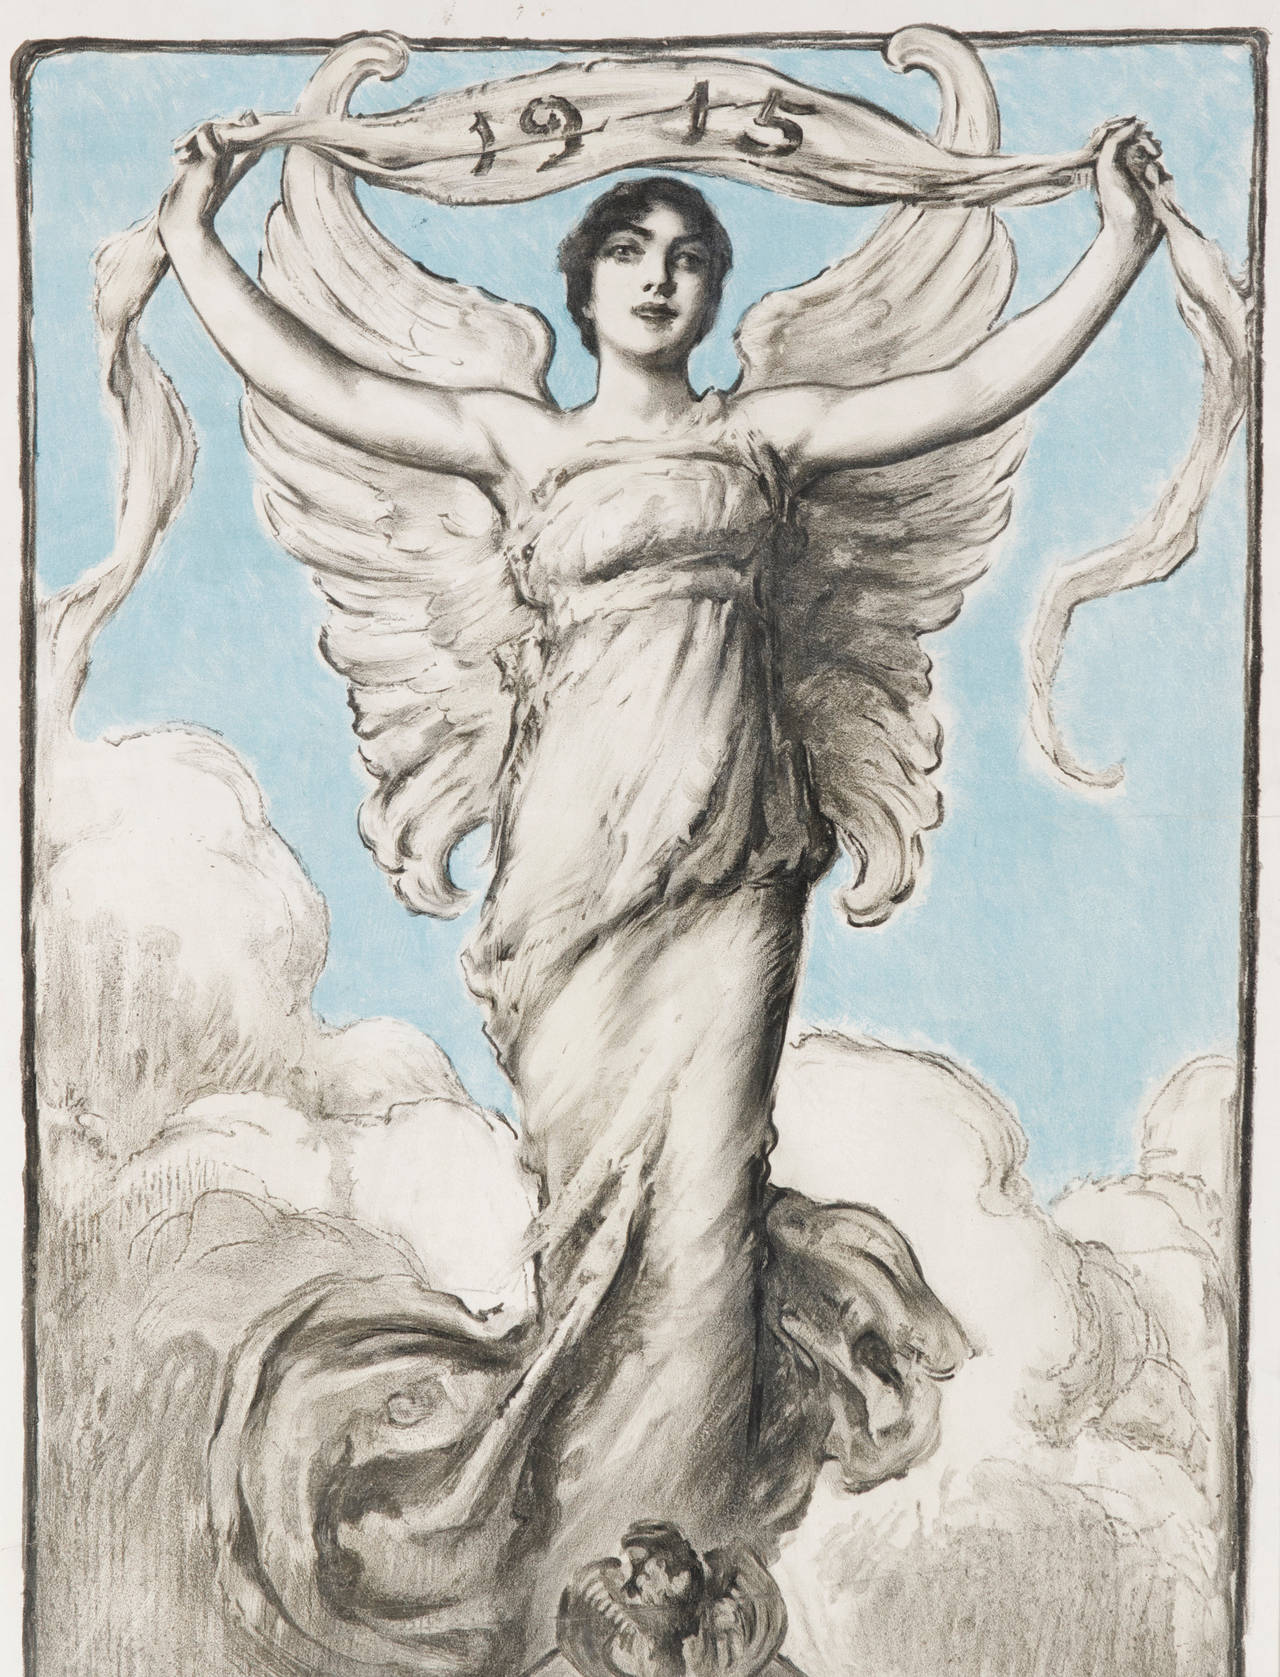 RARE SUFFRAGETTE POSTER, DESIGNED BY SPANISH-AMERICAN ARTIST F. LUIS MORA FOR THE EMPIRE STATE (NEW YORK) CAMPAIGN COMMITTEE, ORGANIZED BY CARRIE CHAPMAN CATT, 1915:

This very rare and boldly graphic poster, with its Art Nouveau sensibility, was